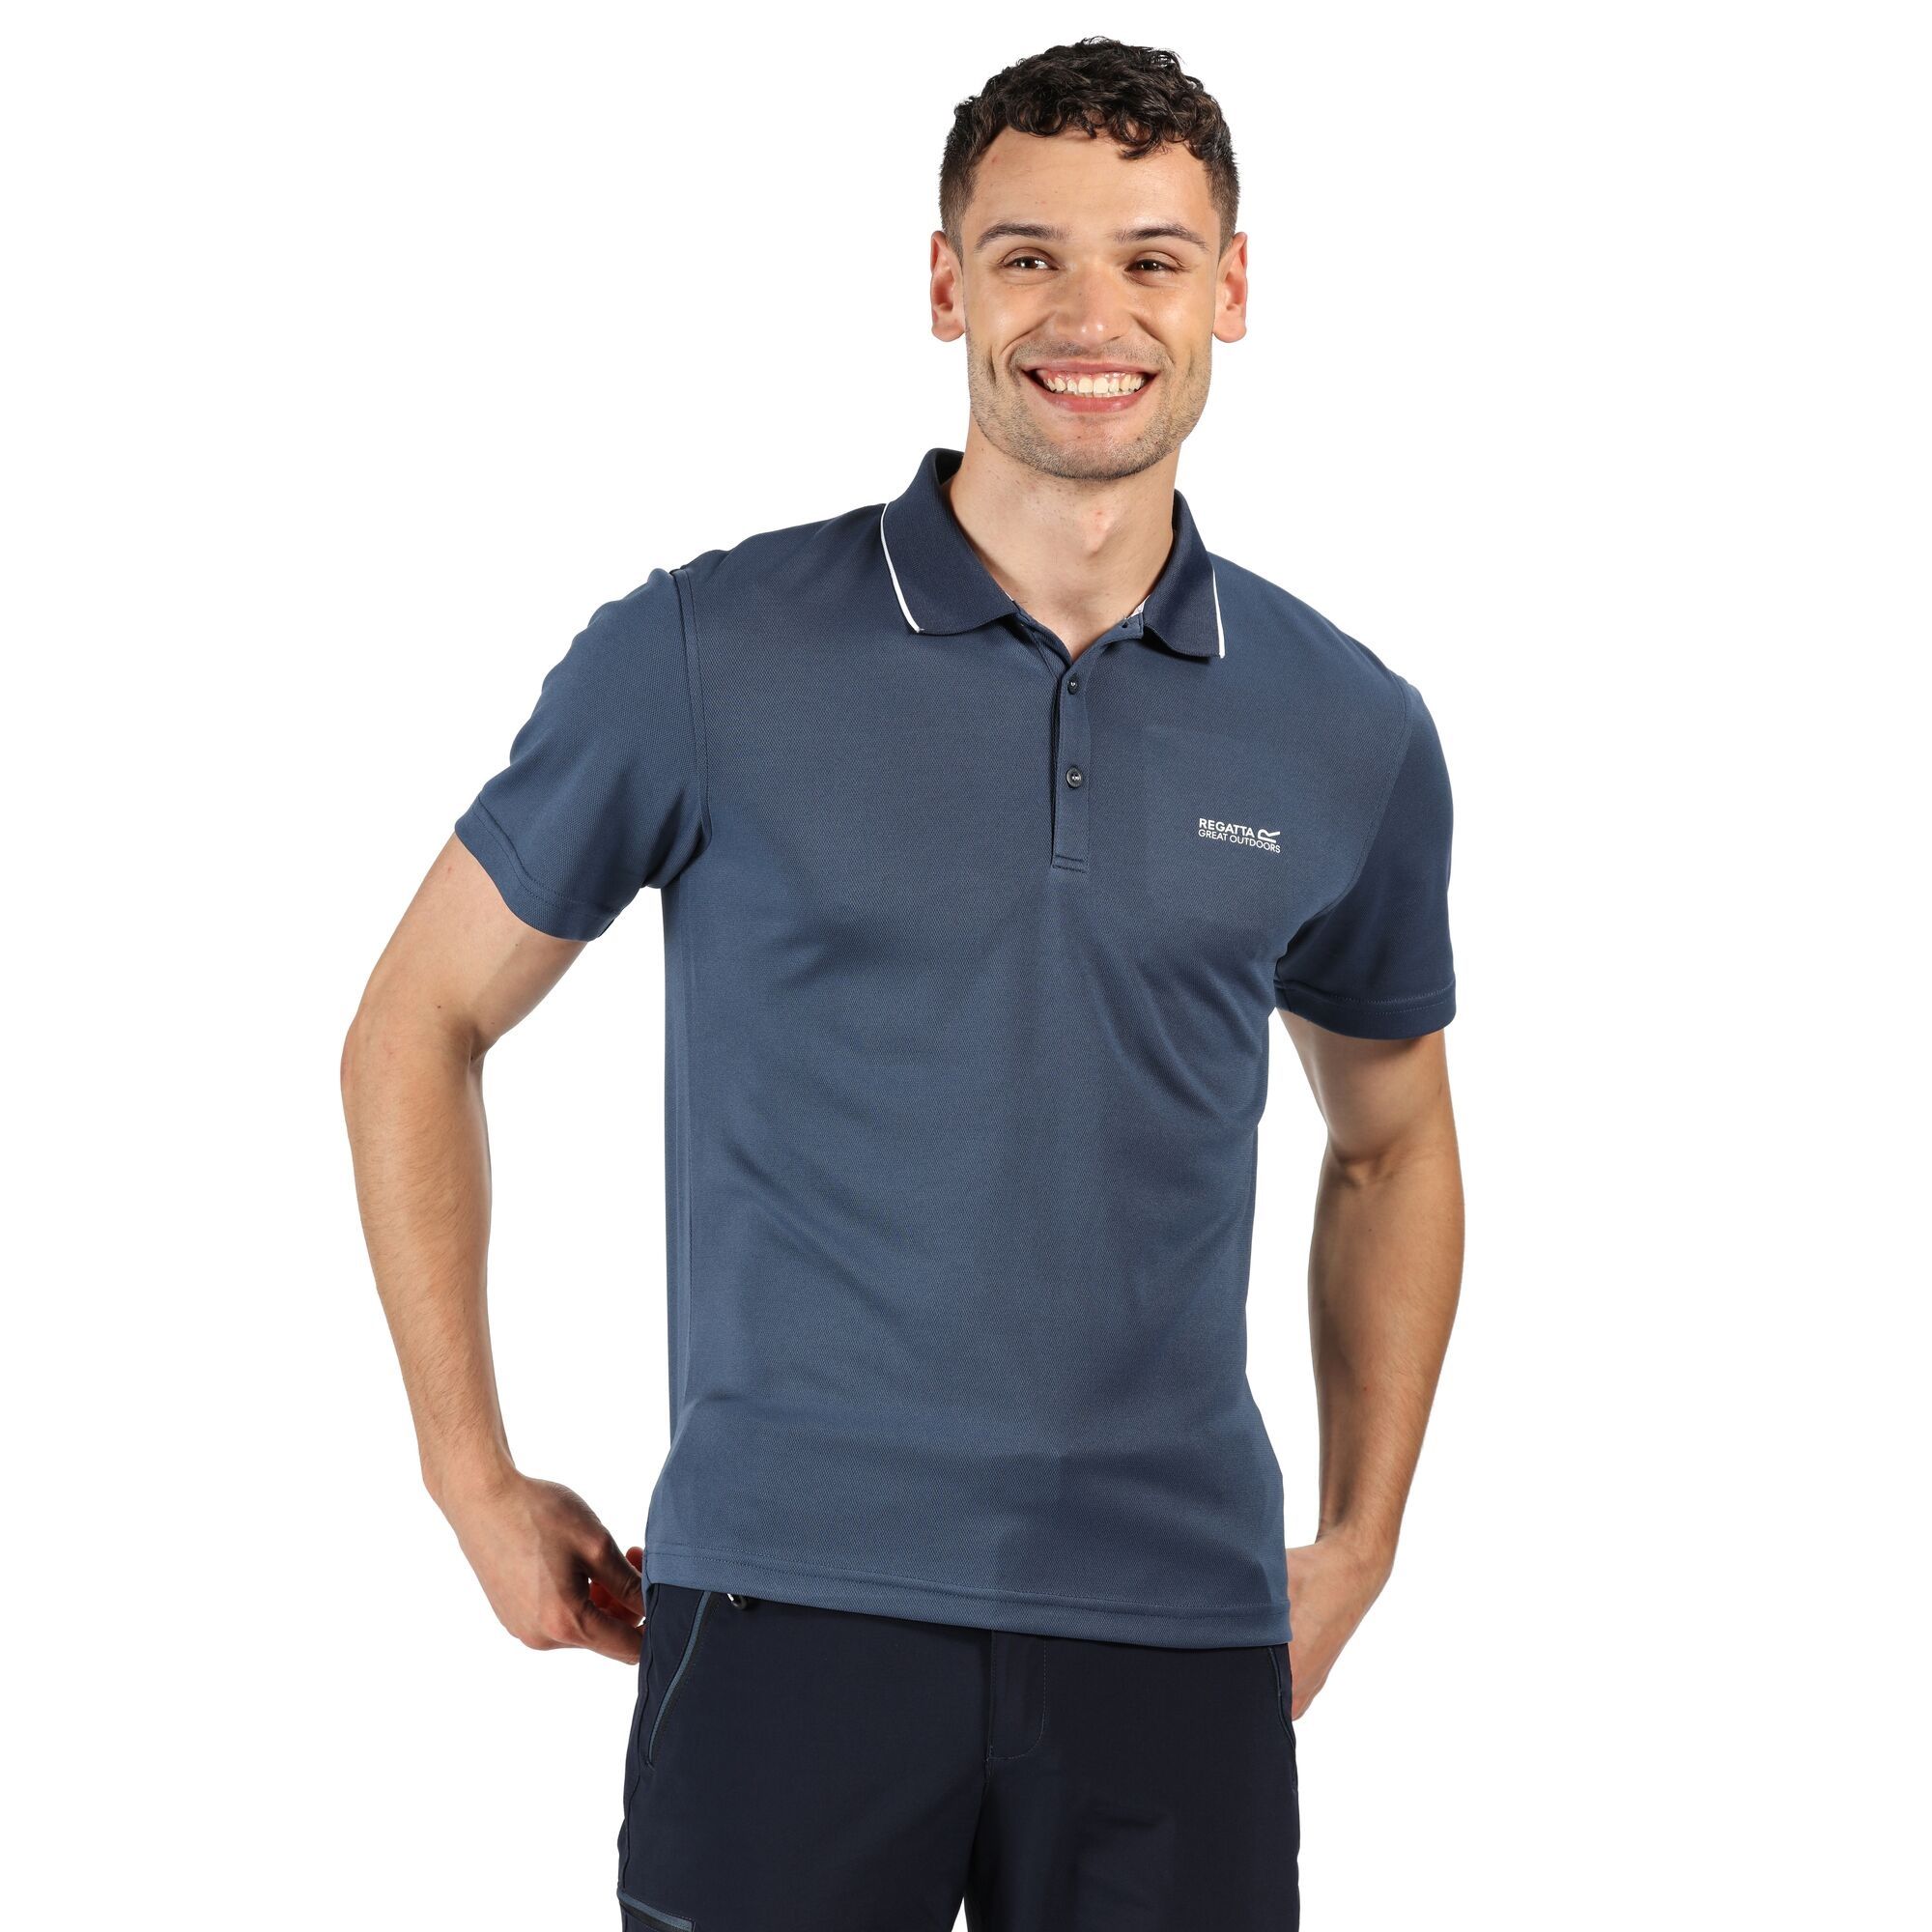 Material: 100% quick dry polyester pique fabric. Ribbed collar. Good wicking performance. 3 button placket. Short sleeves.